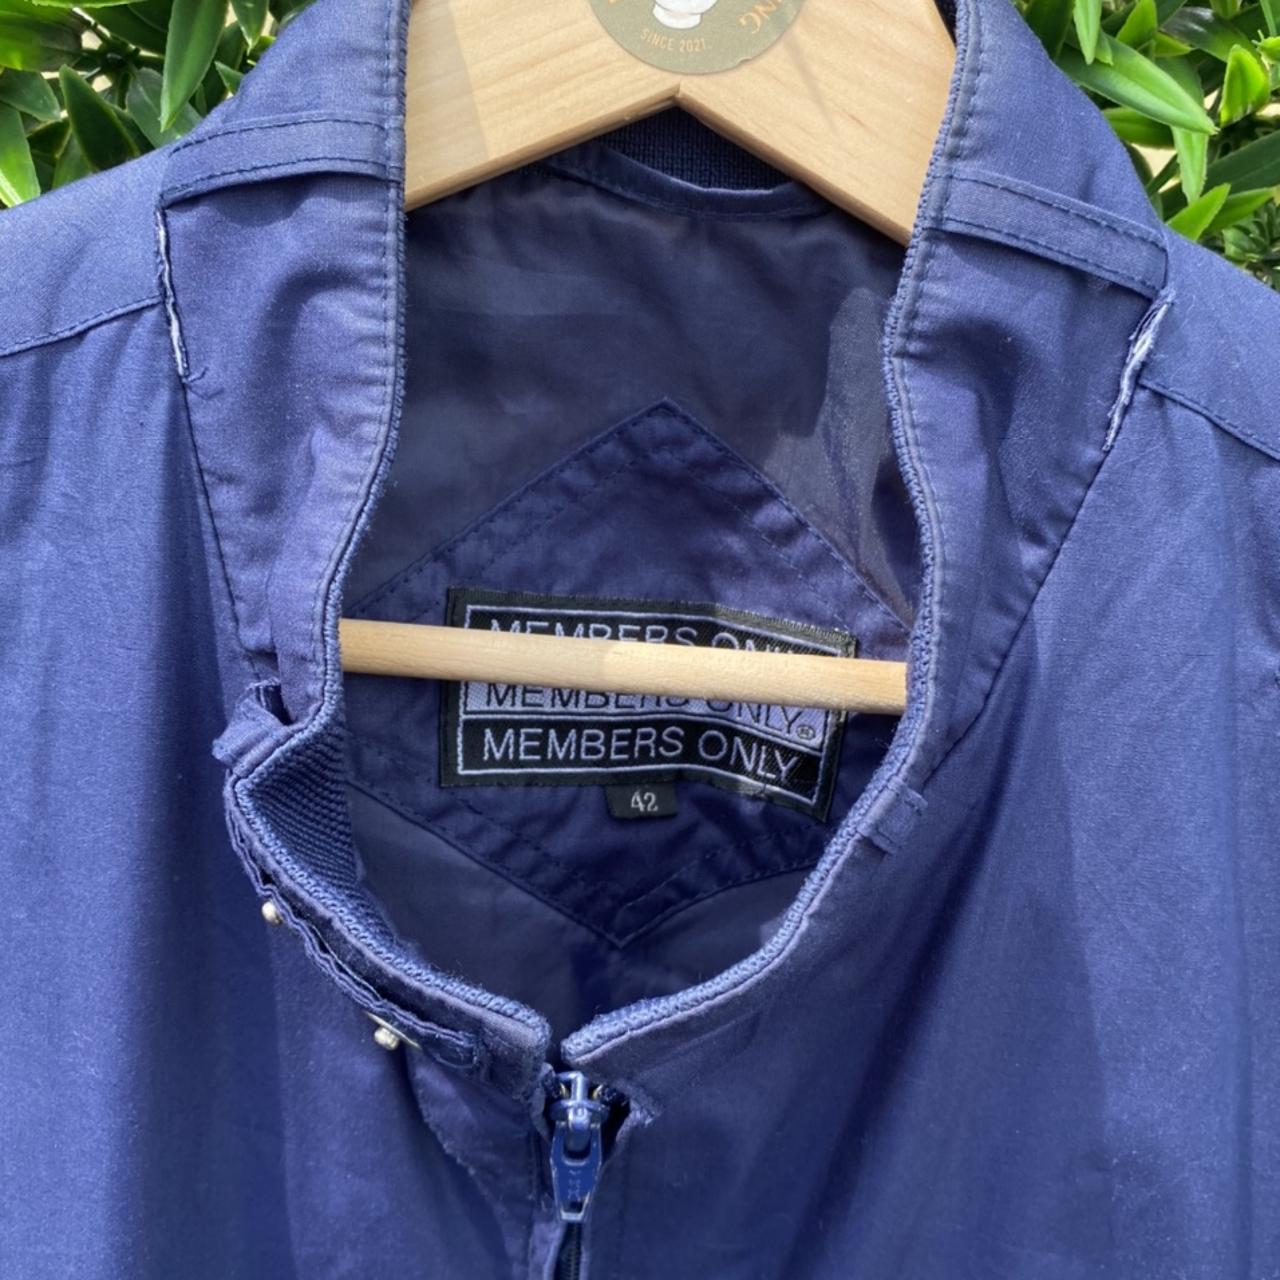 Members Only Men's Navy and Blue Jacket (2)